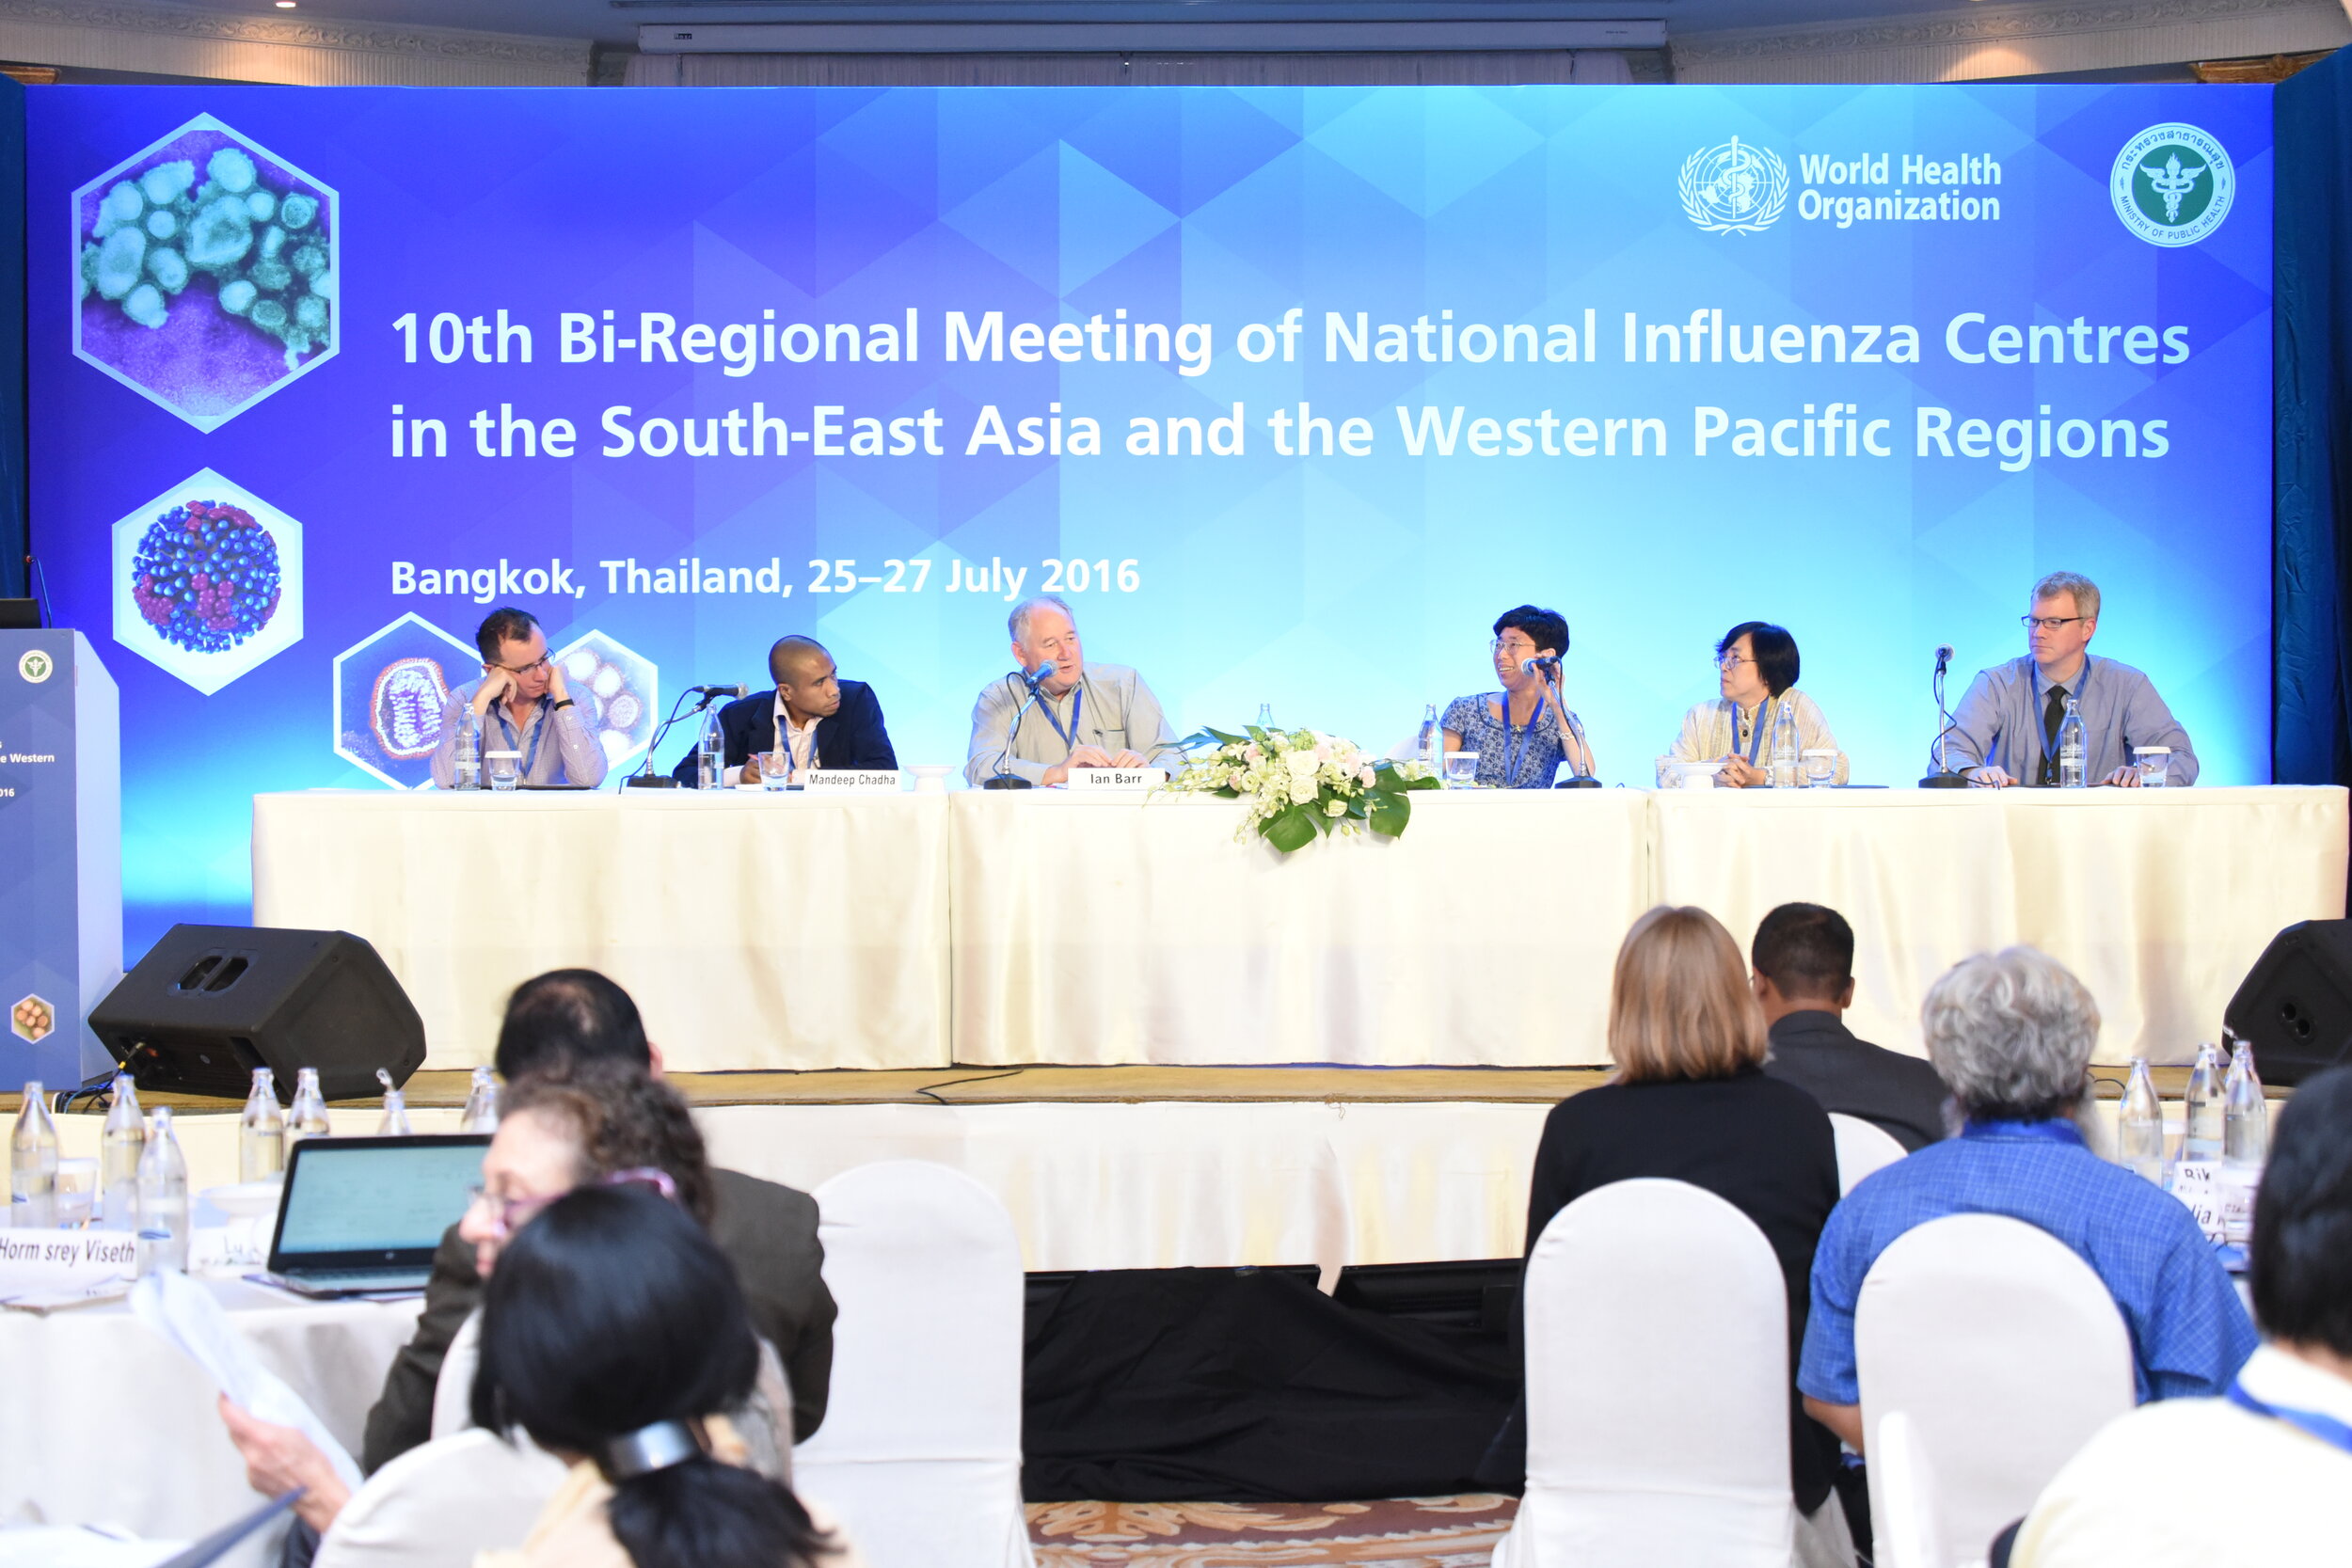 10th Bi-Regional Meeting of National Influenza Centers in the South-East Asia and Western Pacific Regions - Conferences, Meetings &amp; Workshops